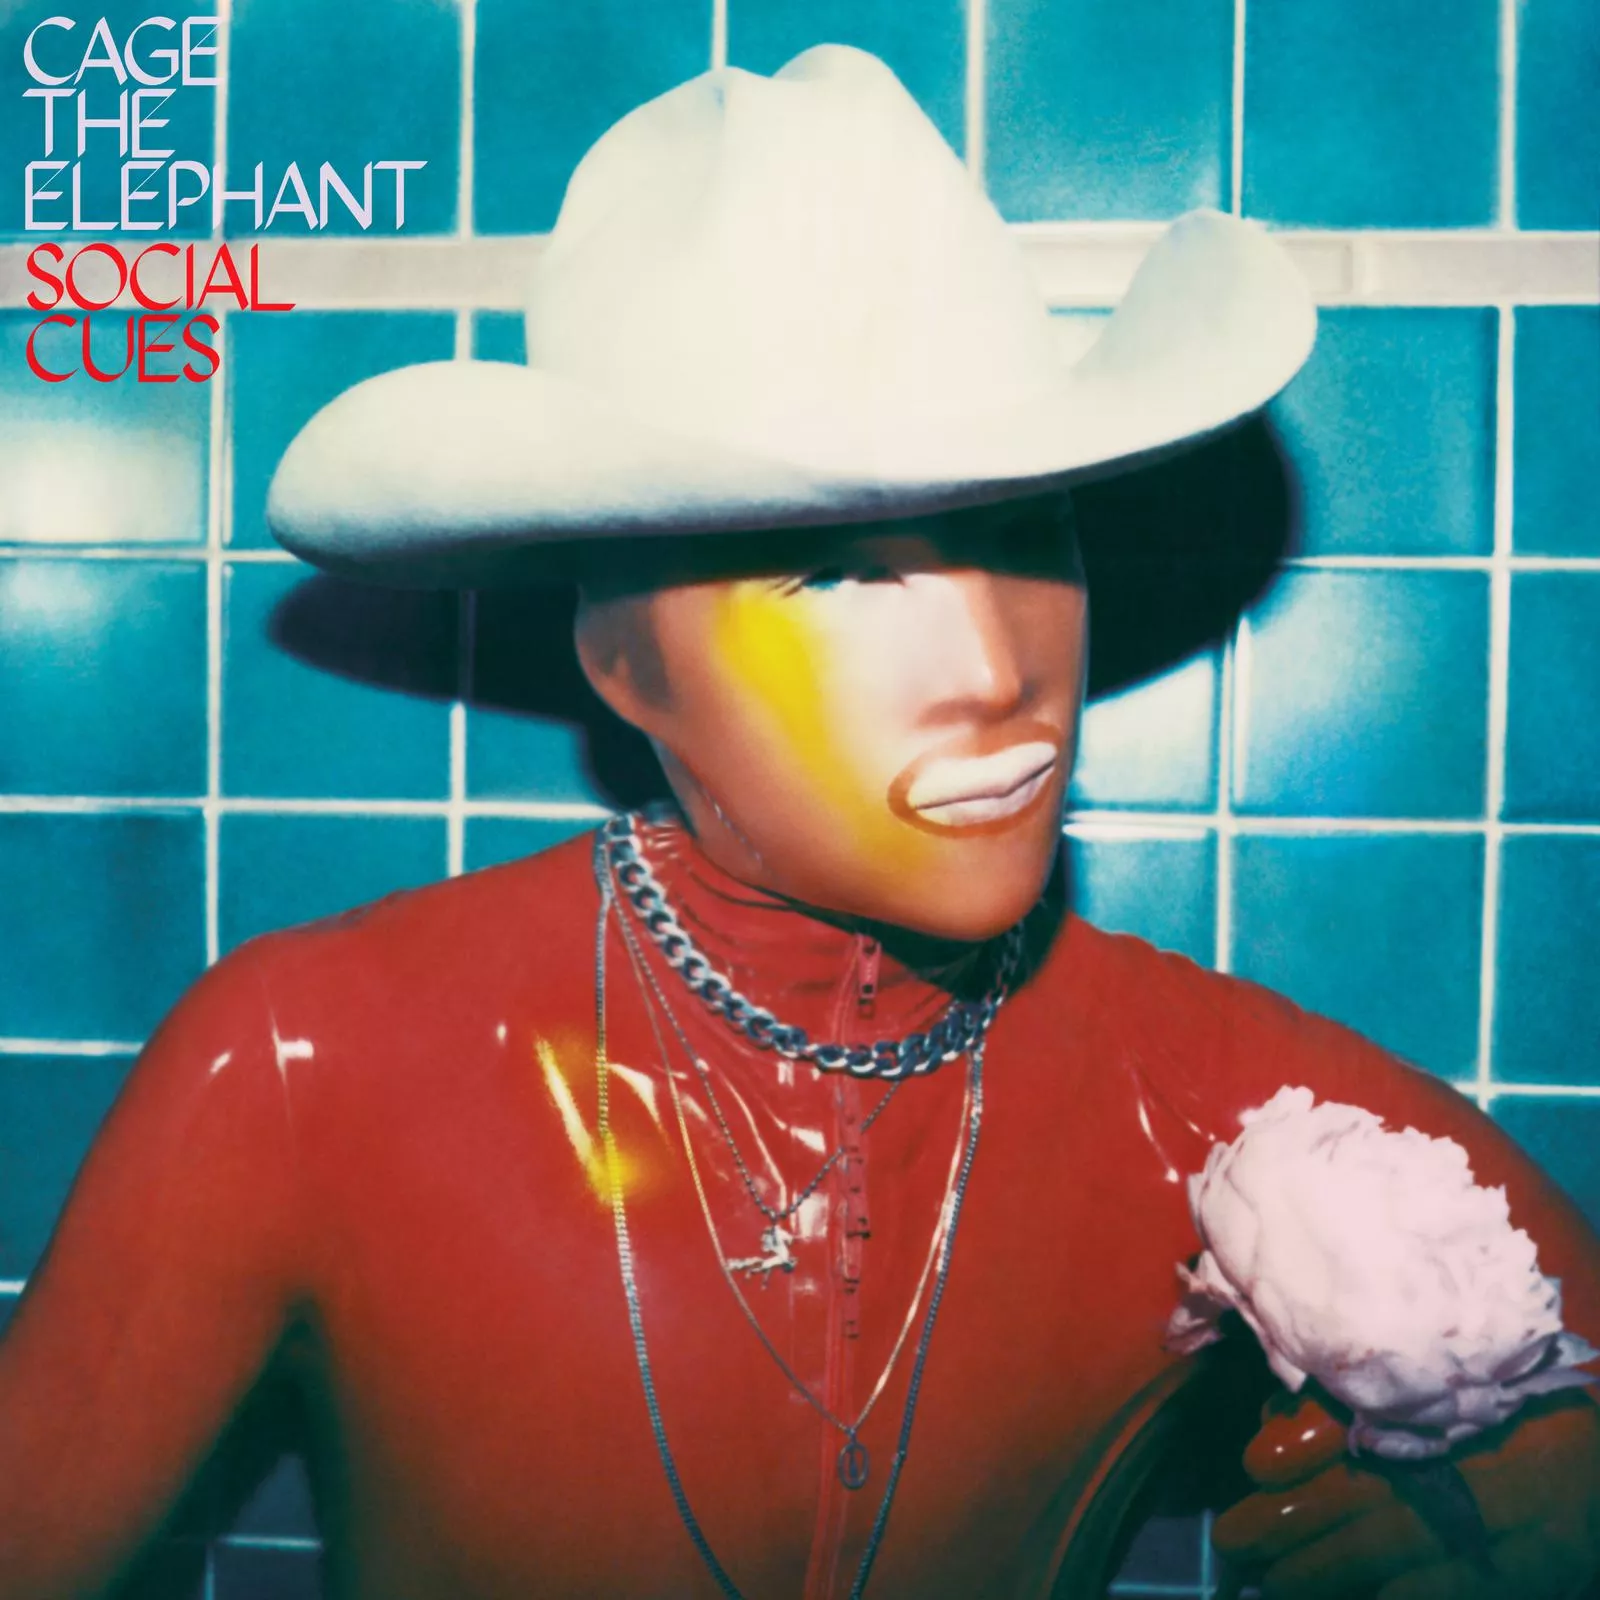 Social Cues - Cage The Elephant